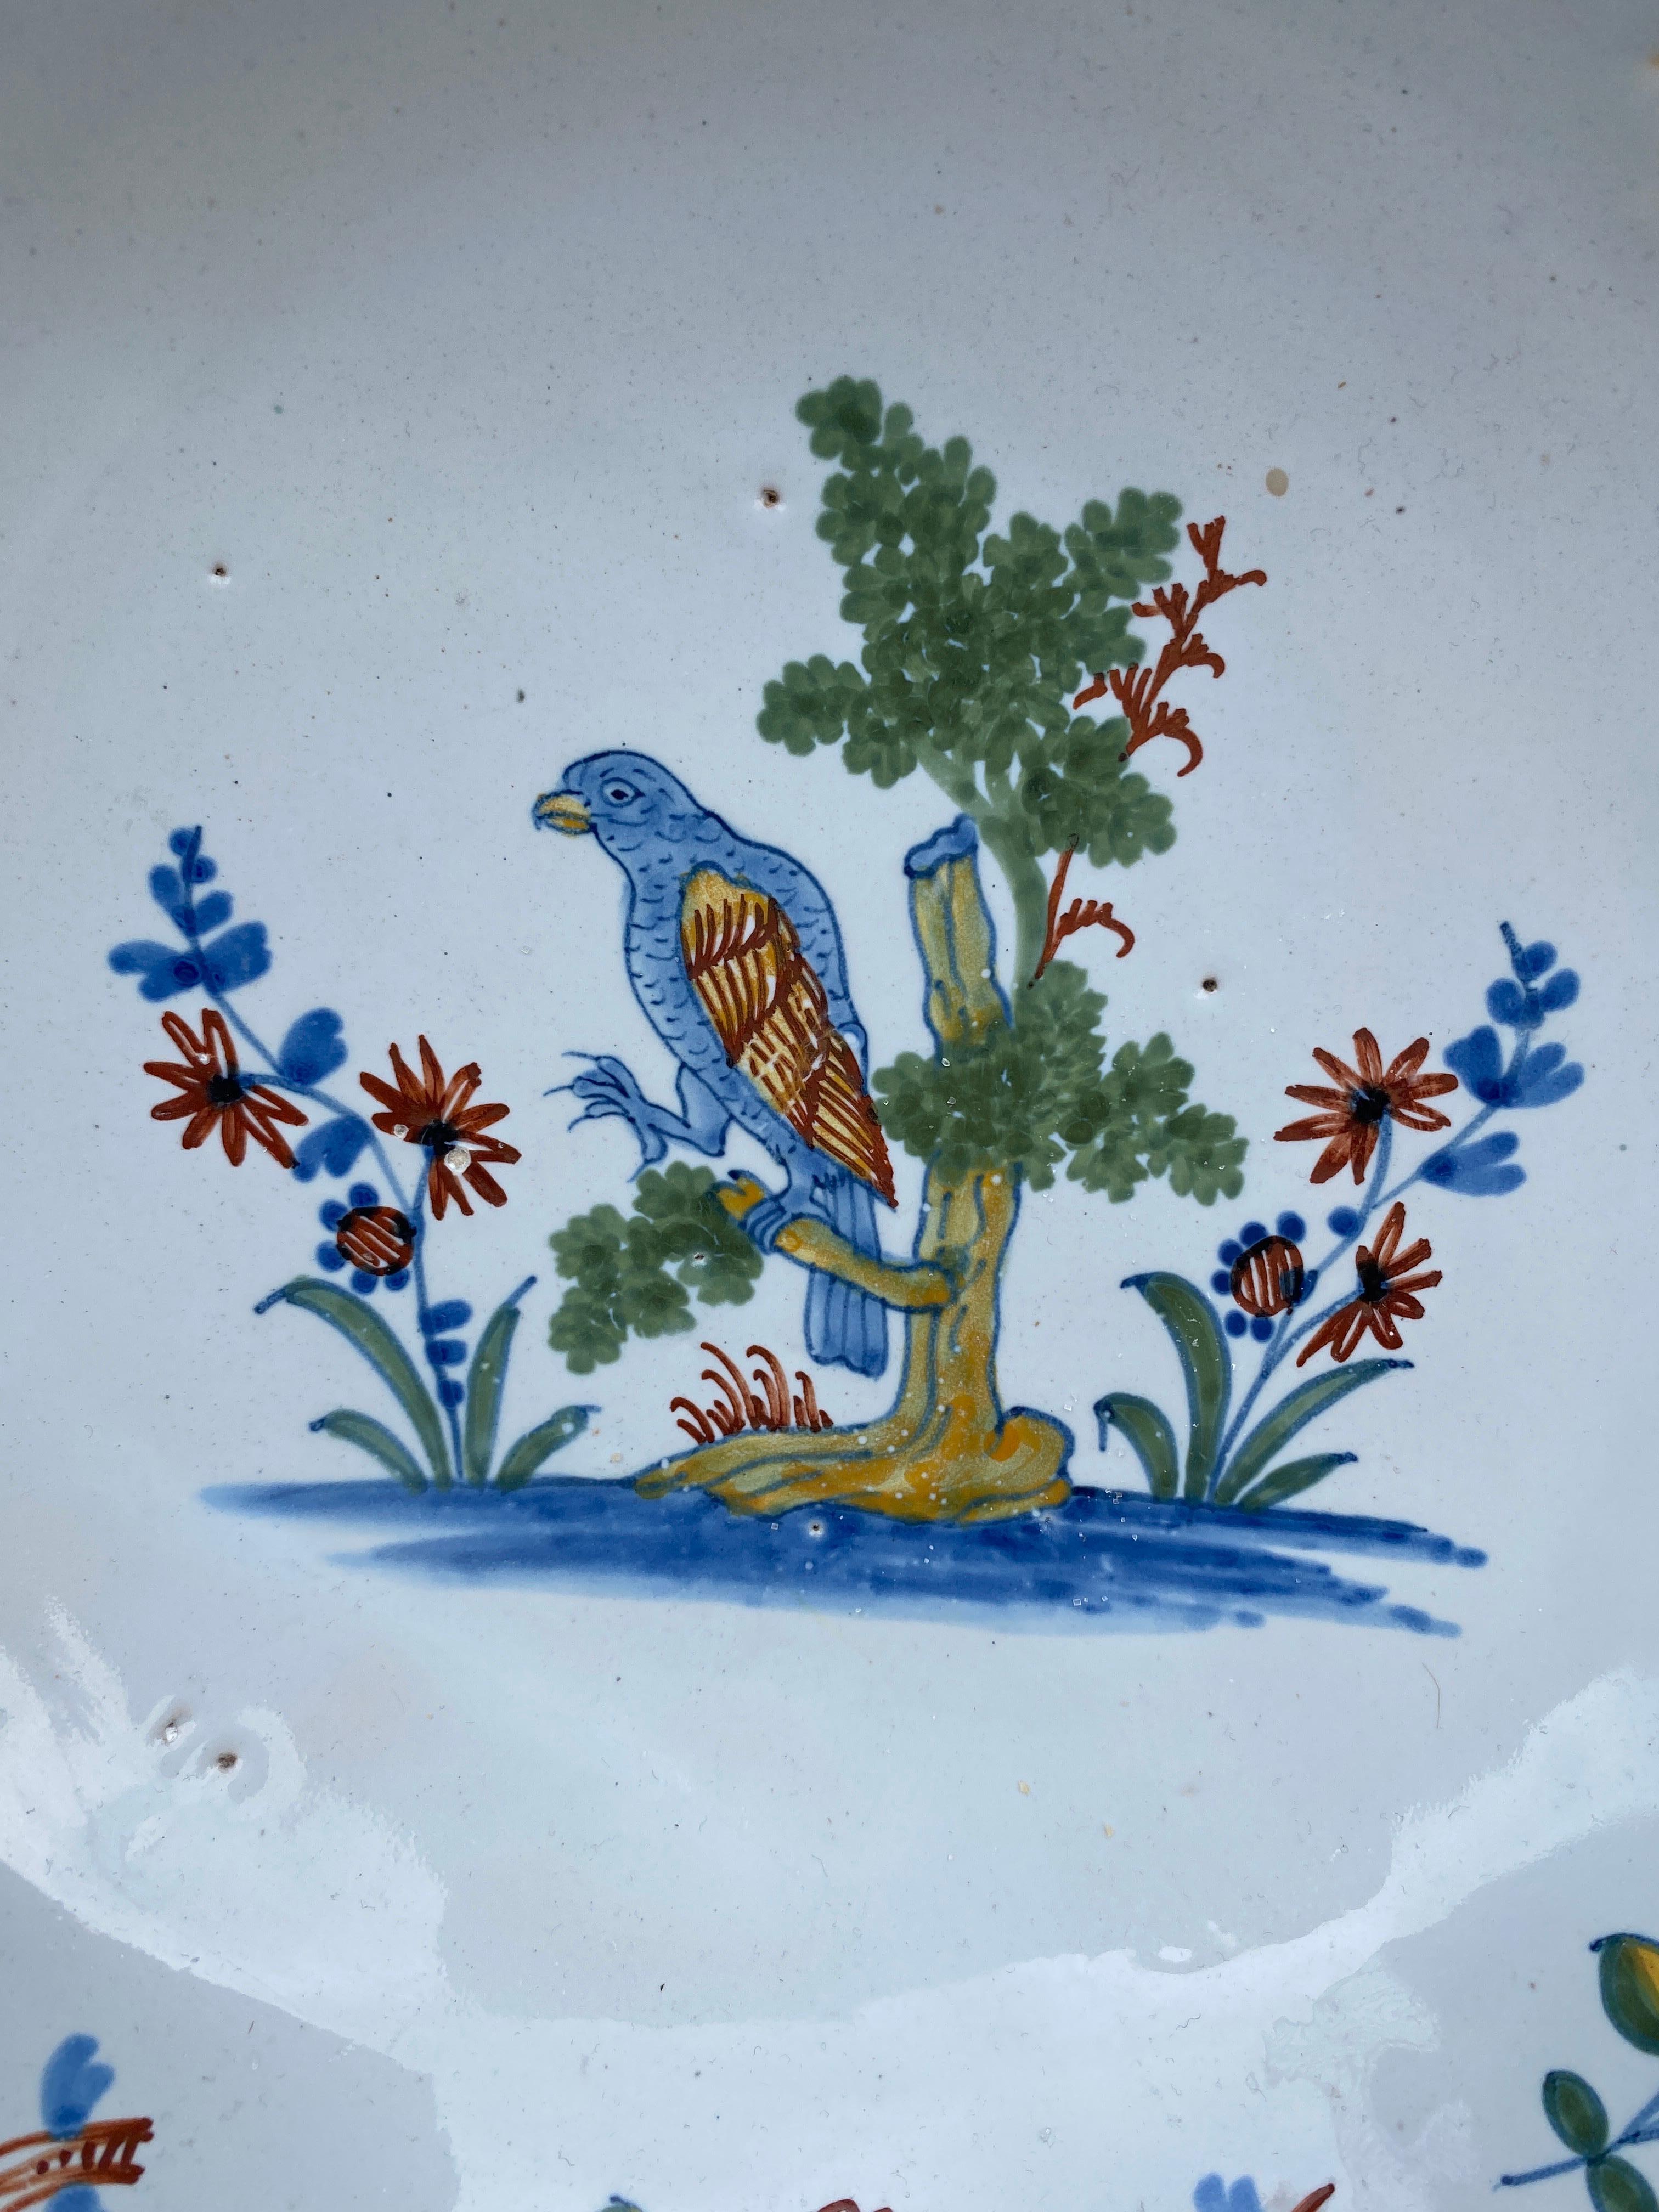 18th Century Large French Faience Parrot Bowl La Rochelle.
On the center a parrot in a tree.
Unusual cornflower blue color , decorated with flowers and insects.